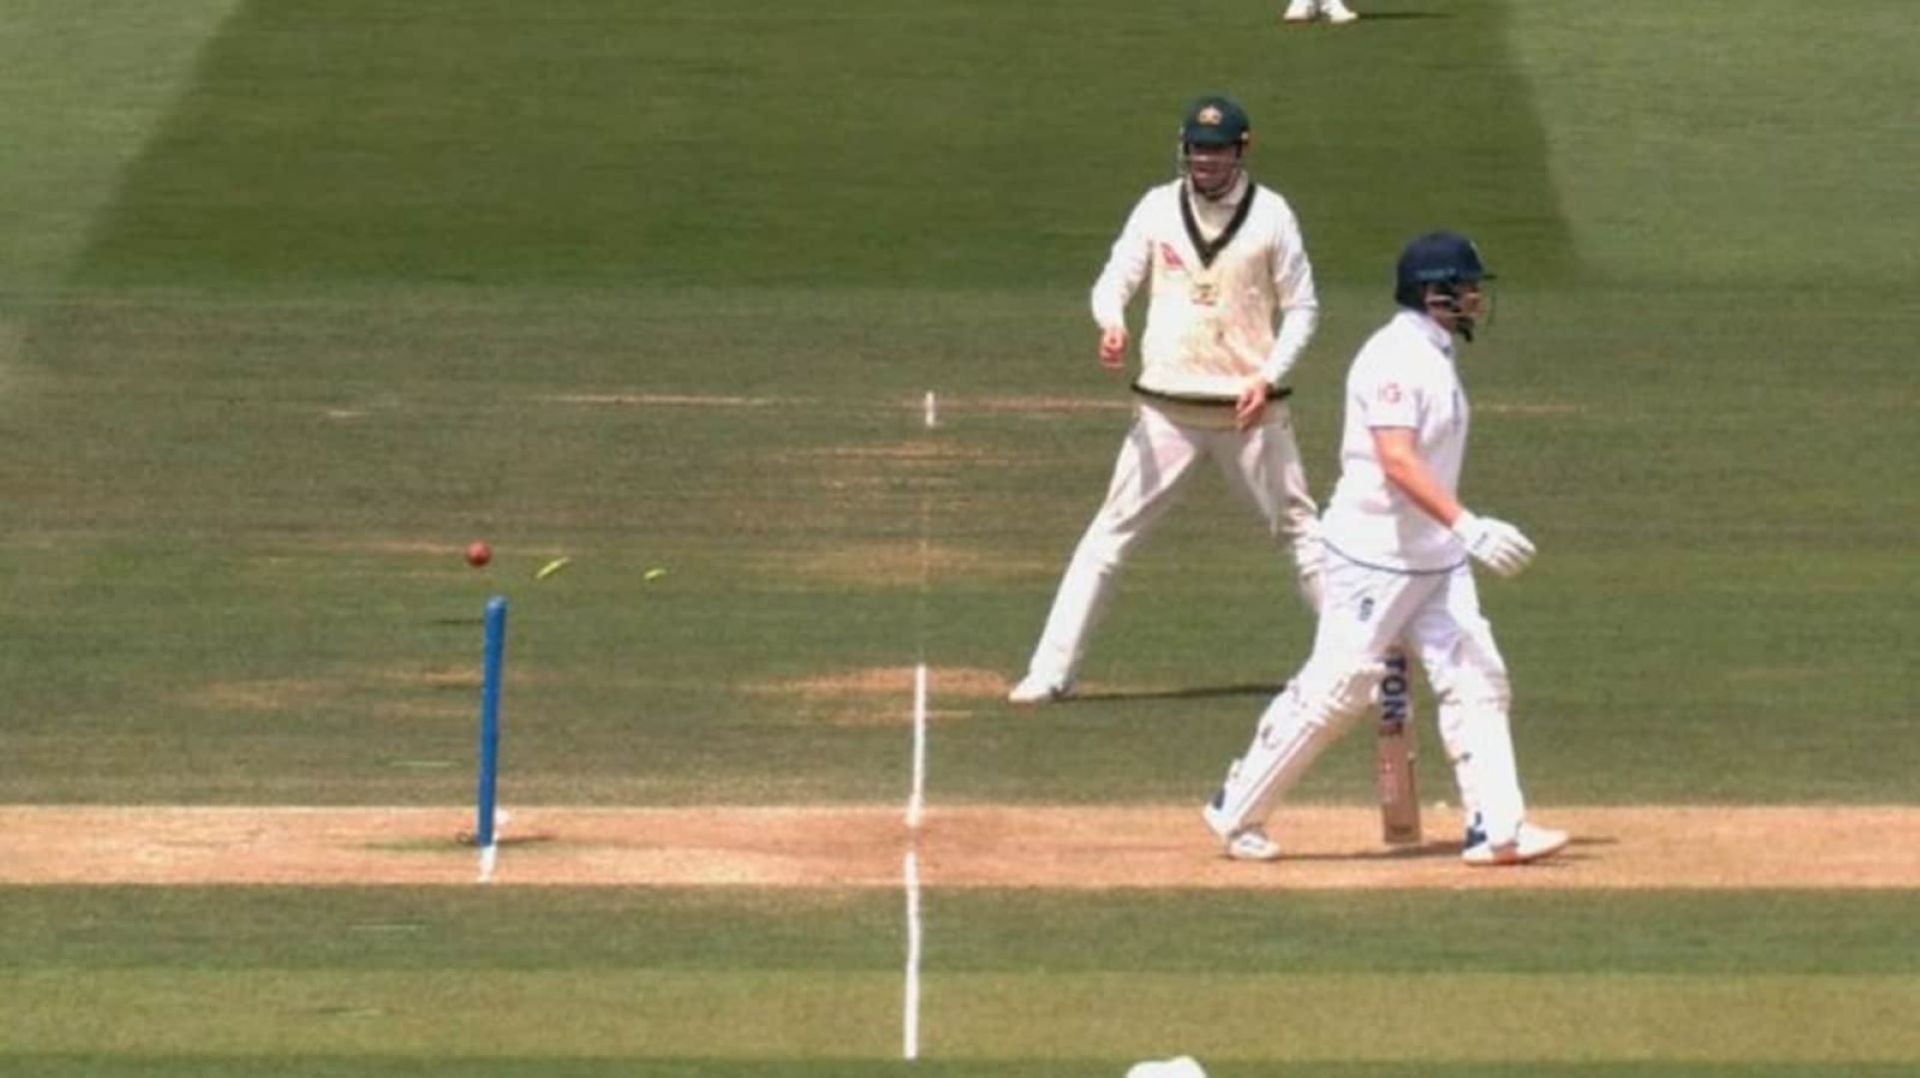 Jonny Bairstow was dismissed in controversial fashion on Day 5 of the second Test